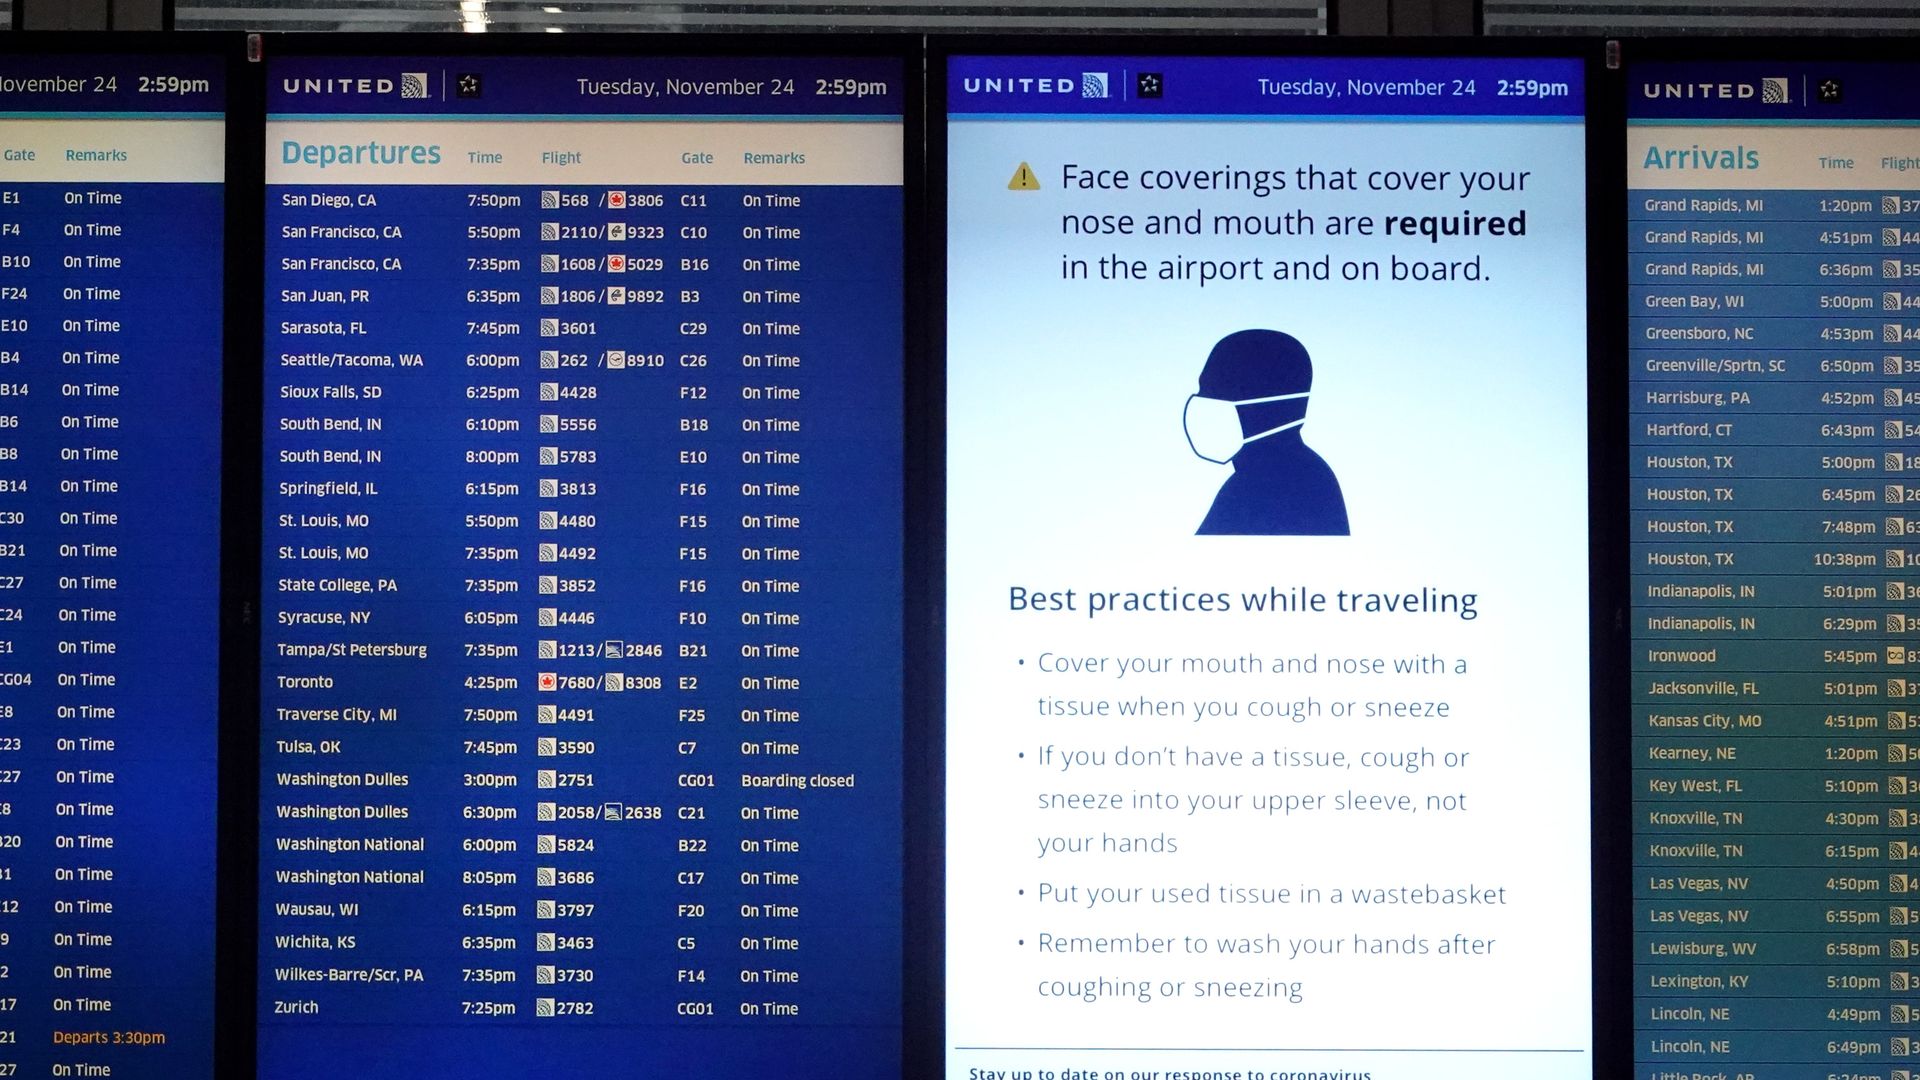 Photo of a monitor at an airport that shows flight departures and times as well as a notice to wear face coverings as required